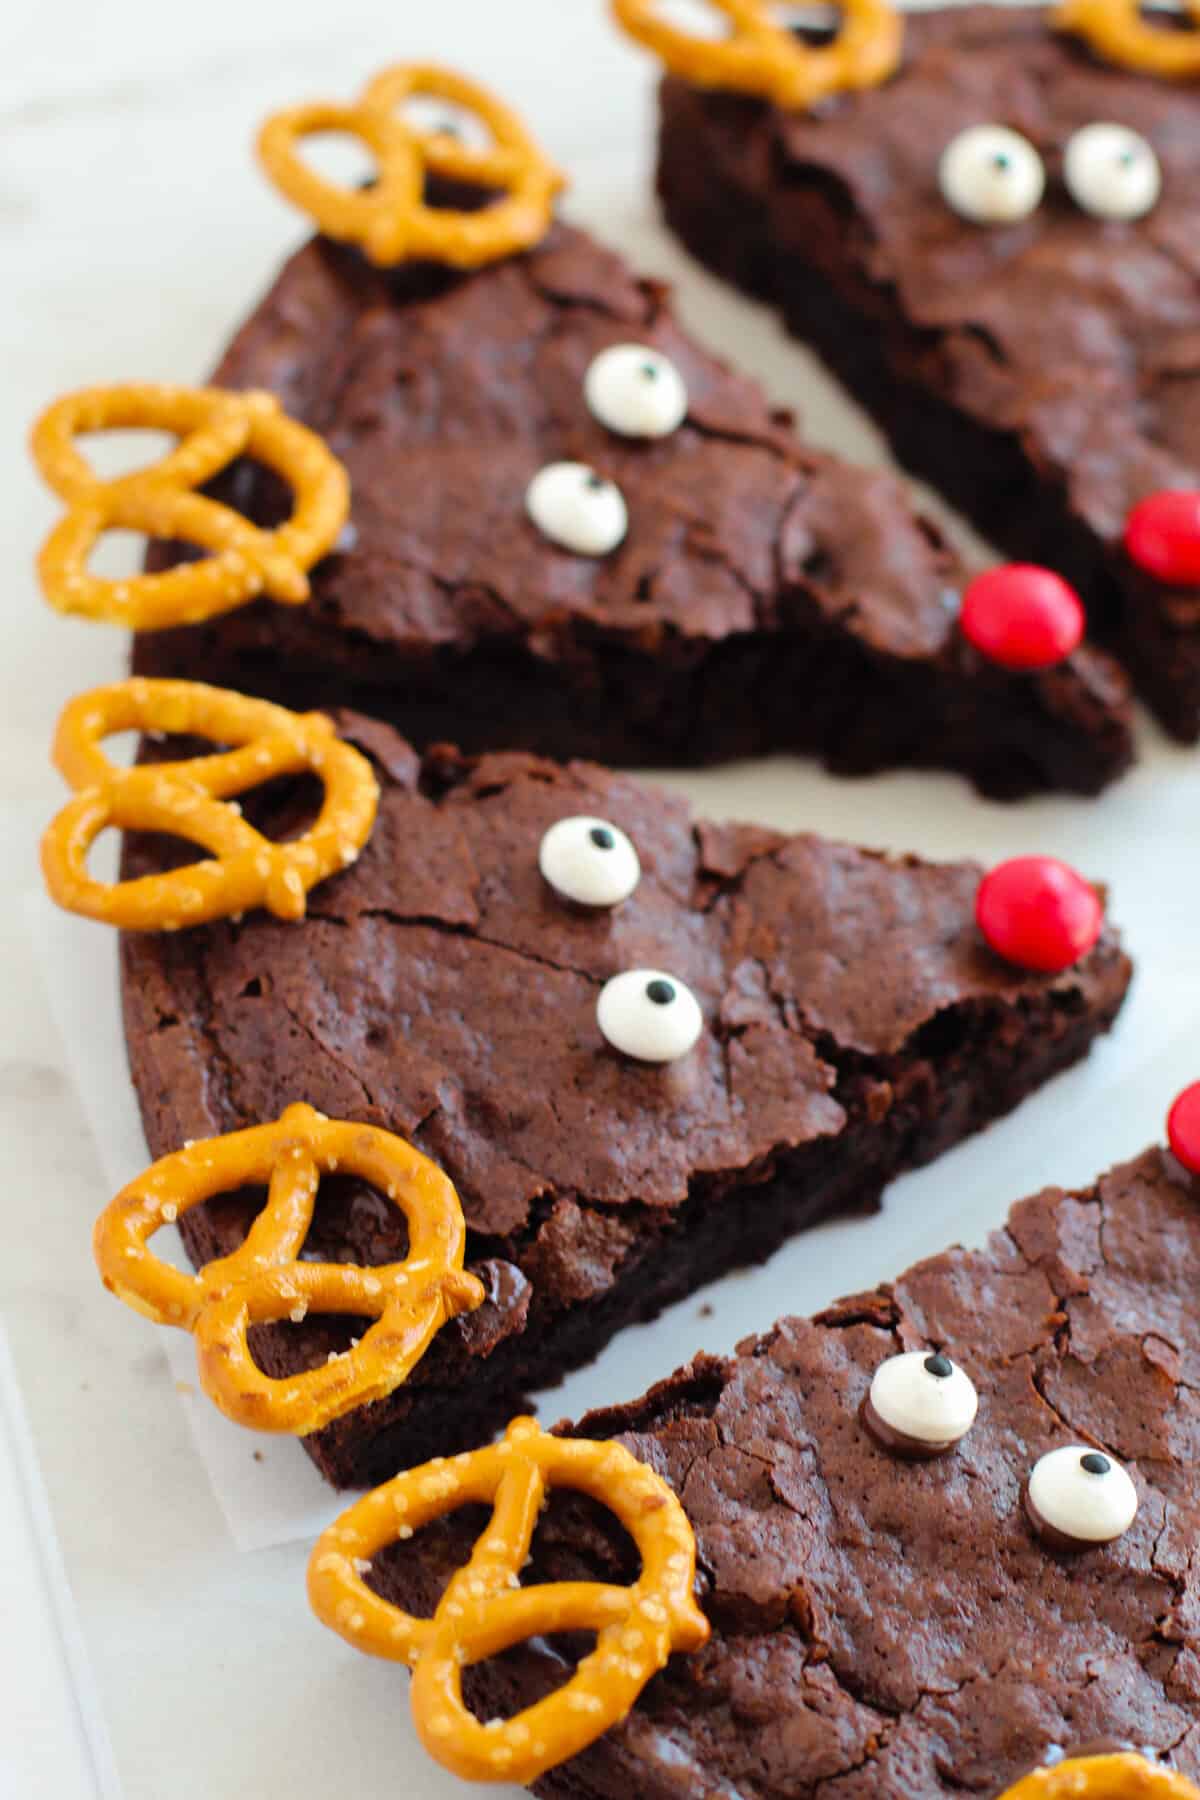 Chocolate brownies decorated with pretzels and candies to look like reindeer.